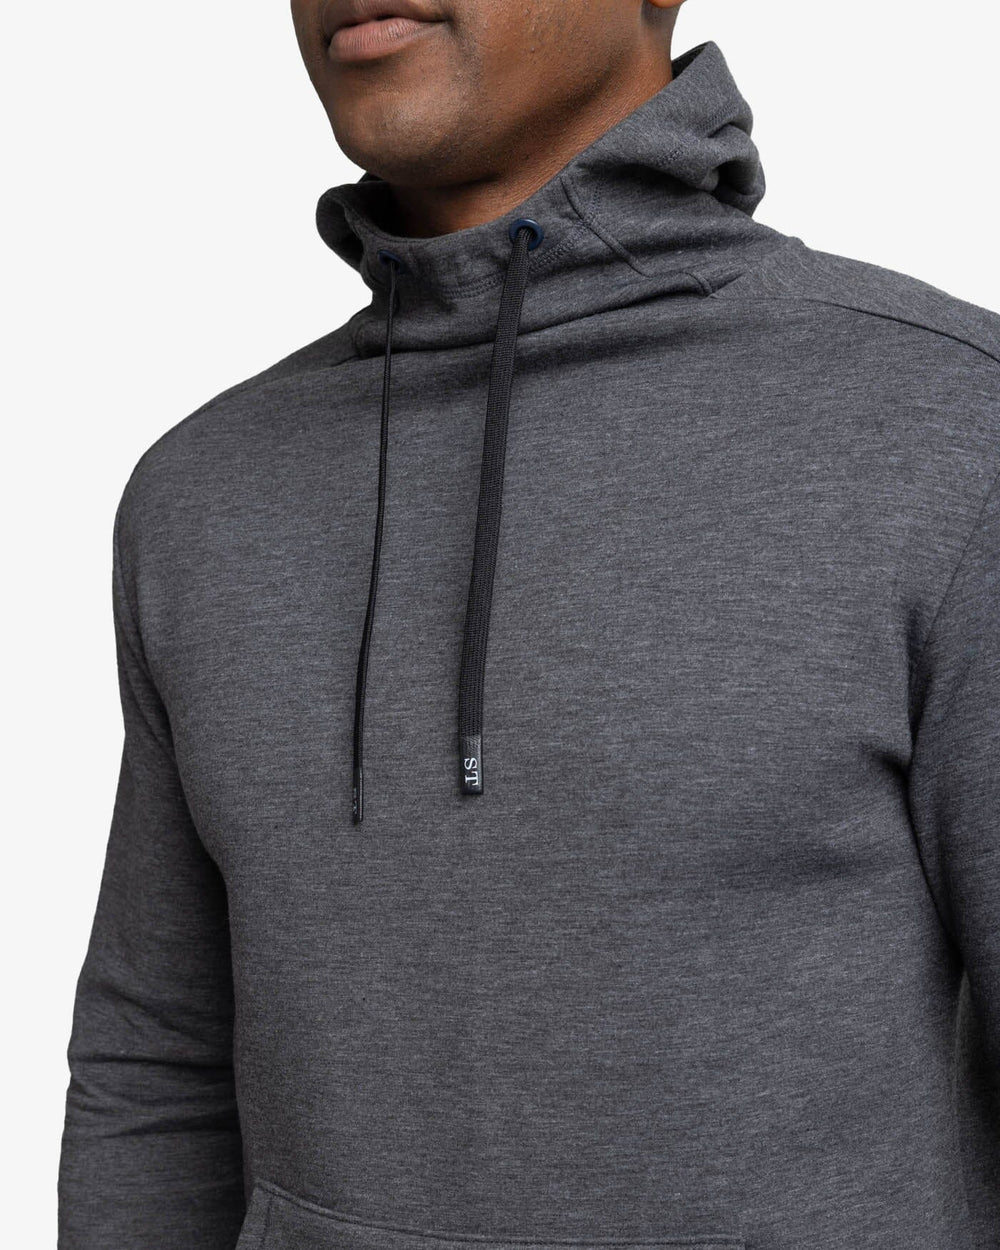 The detail view of the Southern Tide Stratford Heather Interlock Hoodie by Southern Tide - Heather Caviar Black